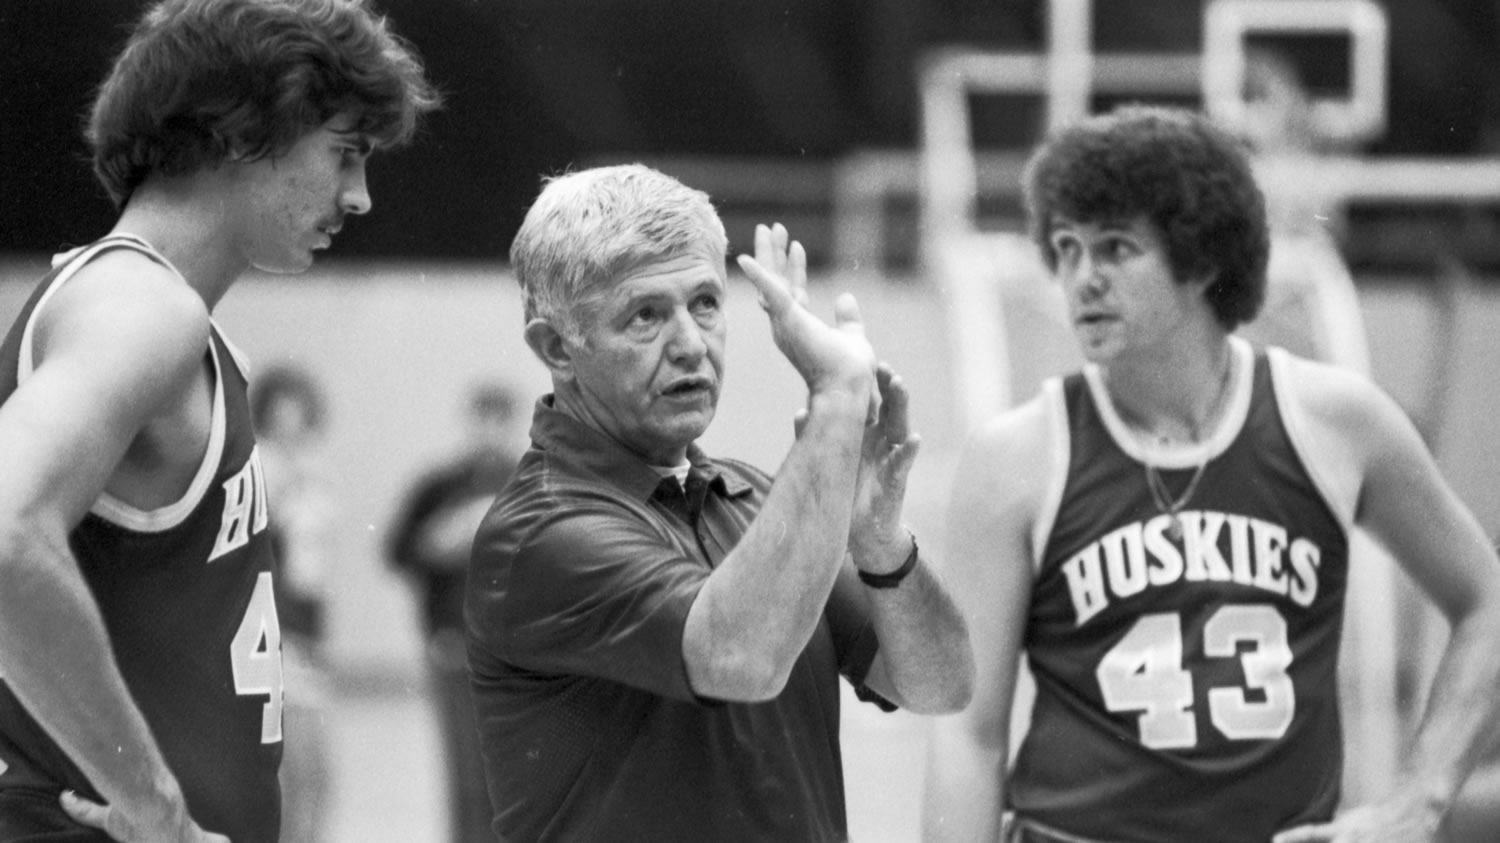 In this Oct. 13, 1977, file photo, Washington coach Marv Harshman shows Scott Hartman, left, how to hold the ball when shooting as Kim Stewart, right, looks on, during a practice session in Seattle. Harshman, who spent 40 years coaching in the state of Washington, died Friday, April 12, 2013.